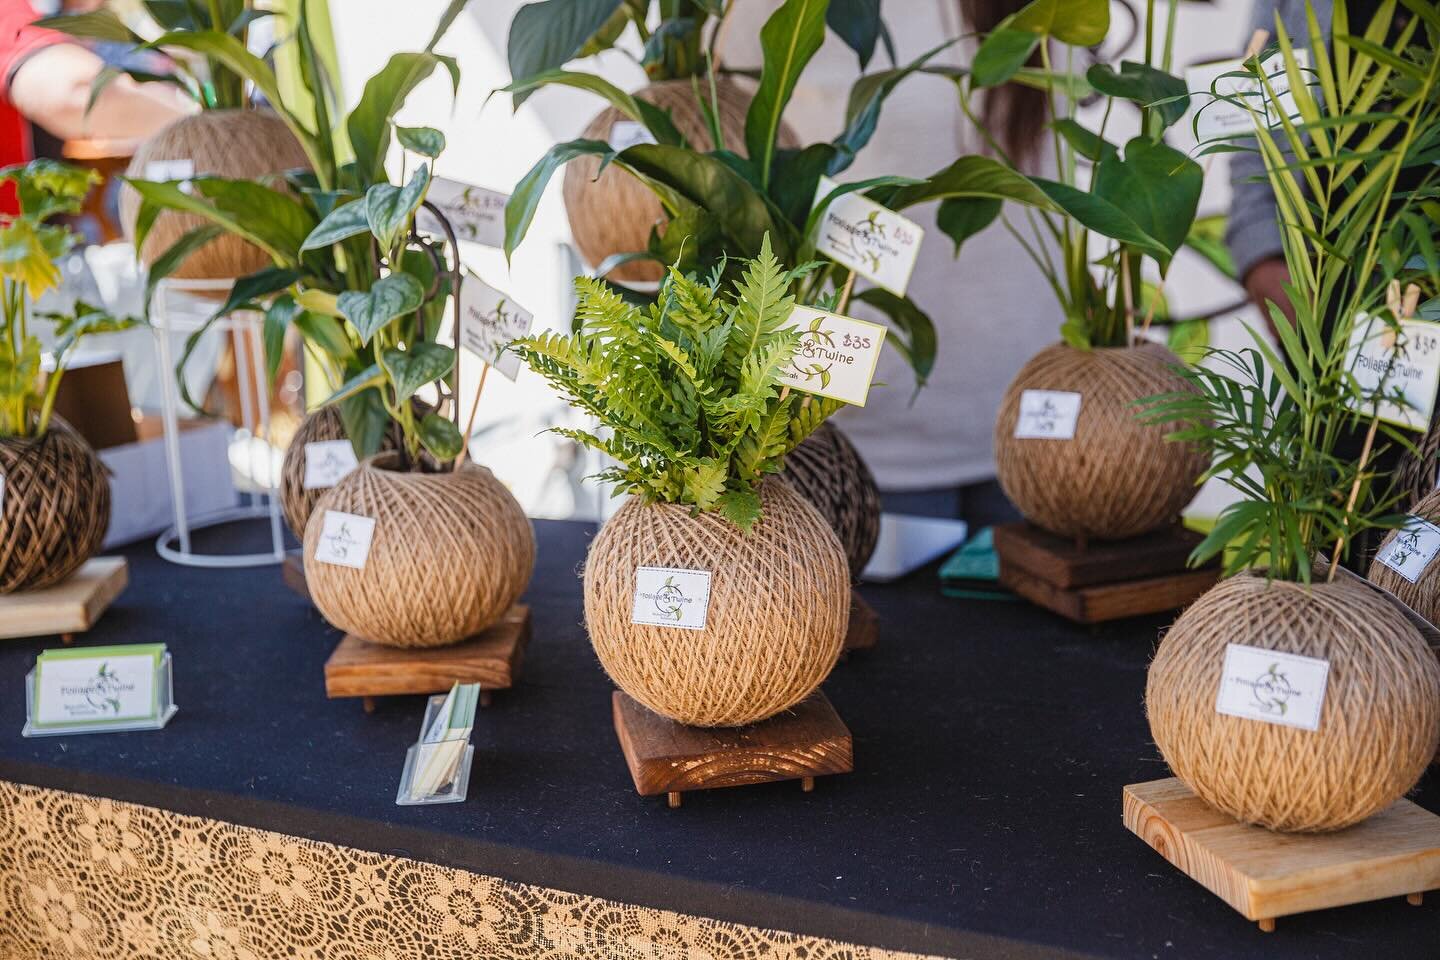 Applications are open if you&rsquo;re looking to attend as a Stallholder to our 2024 Annual SA Spring Garden Festival. If you&rsquo;re interested, email info@saspringgardenfestival.com.au for an application form. 

#sa #sasgf #spring #springgardenfes